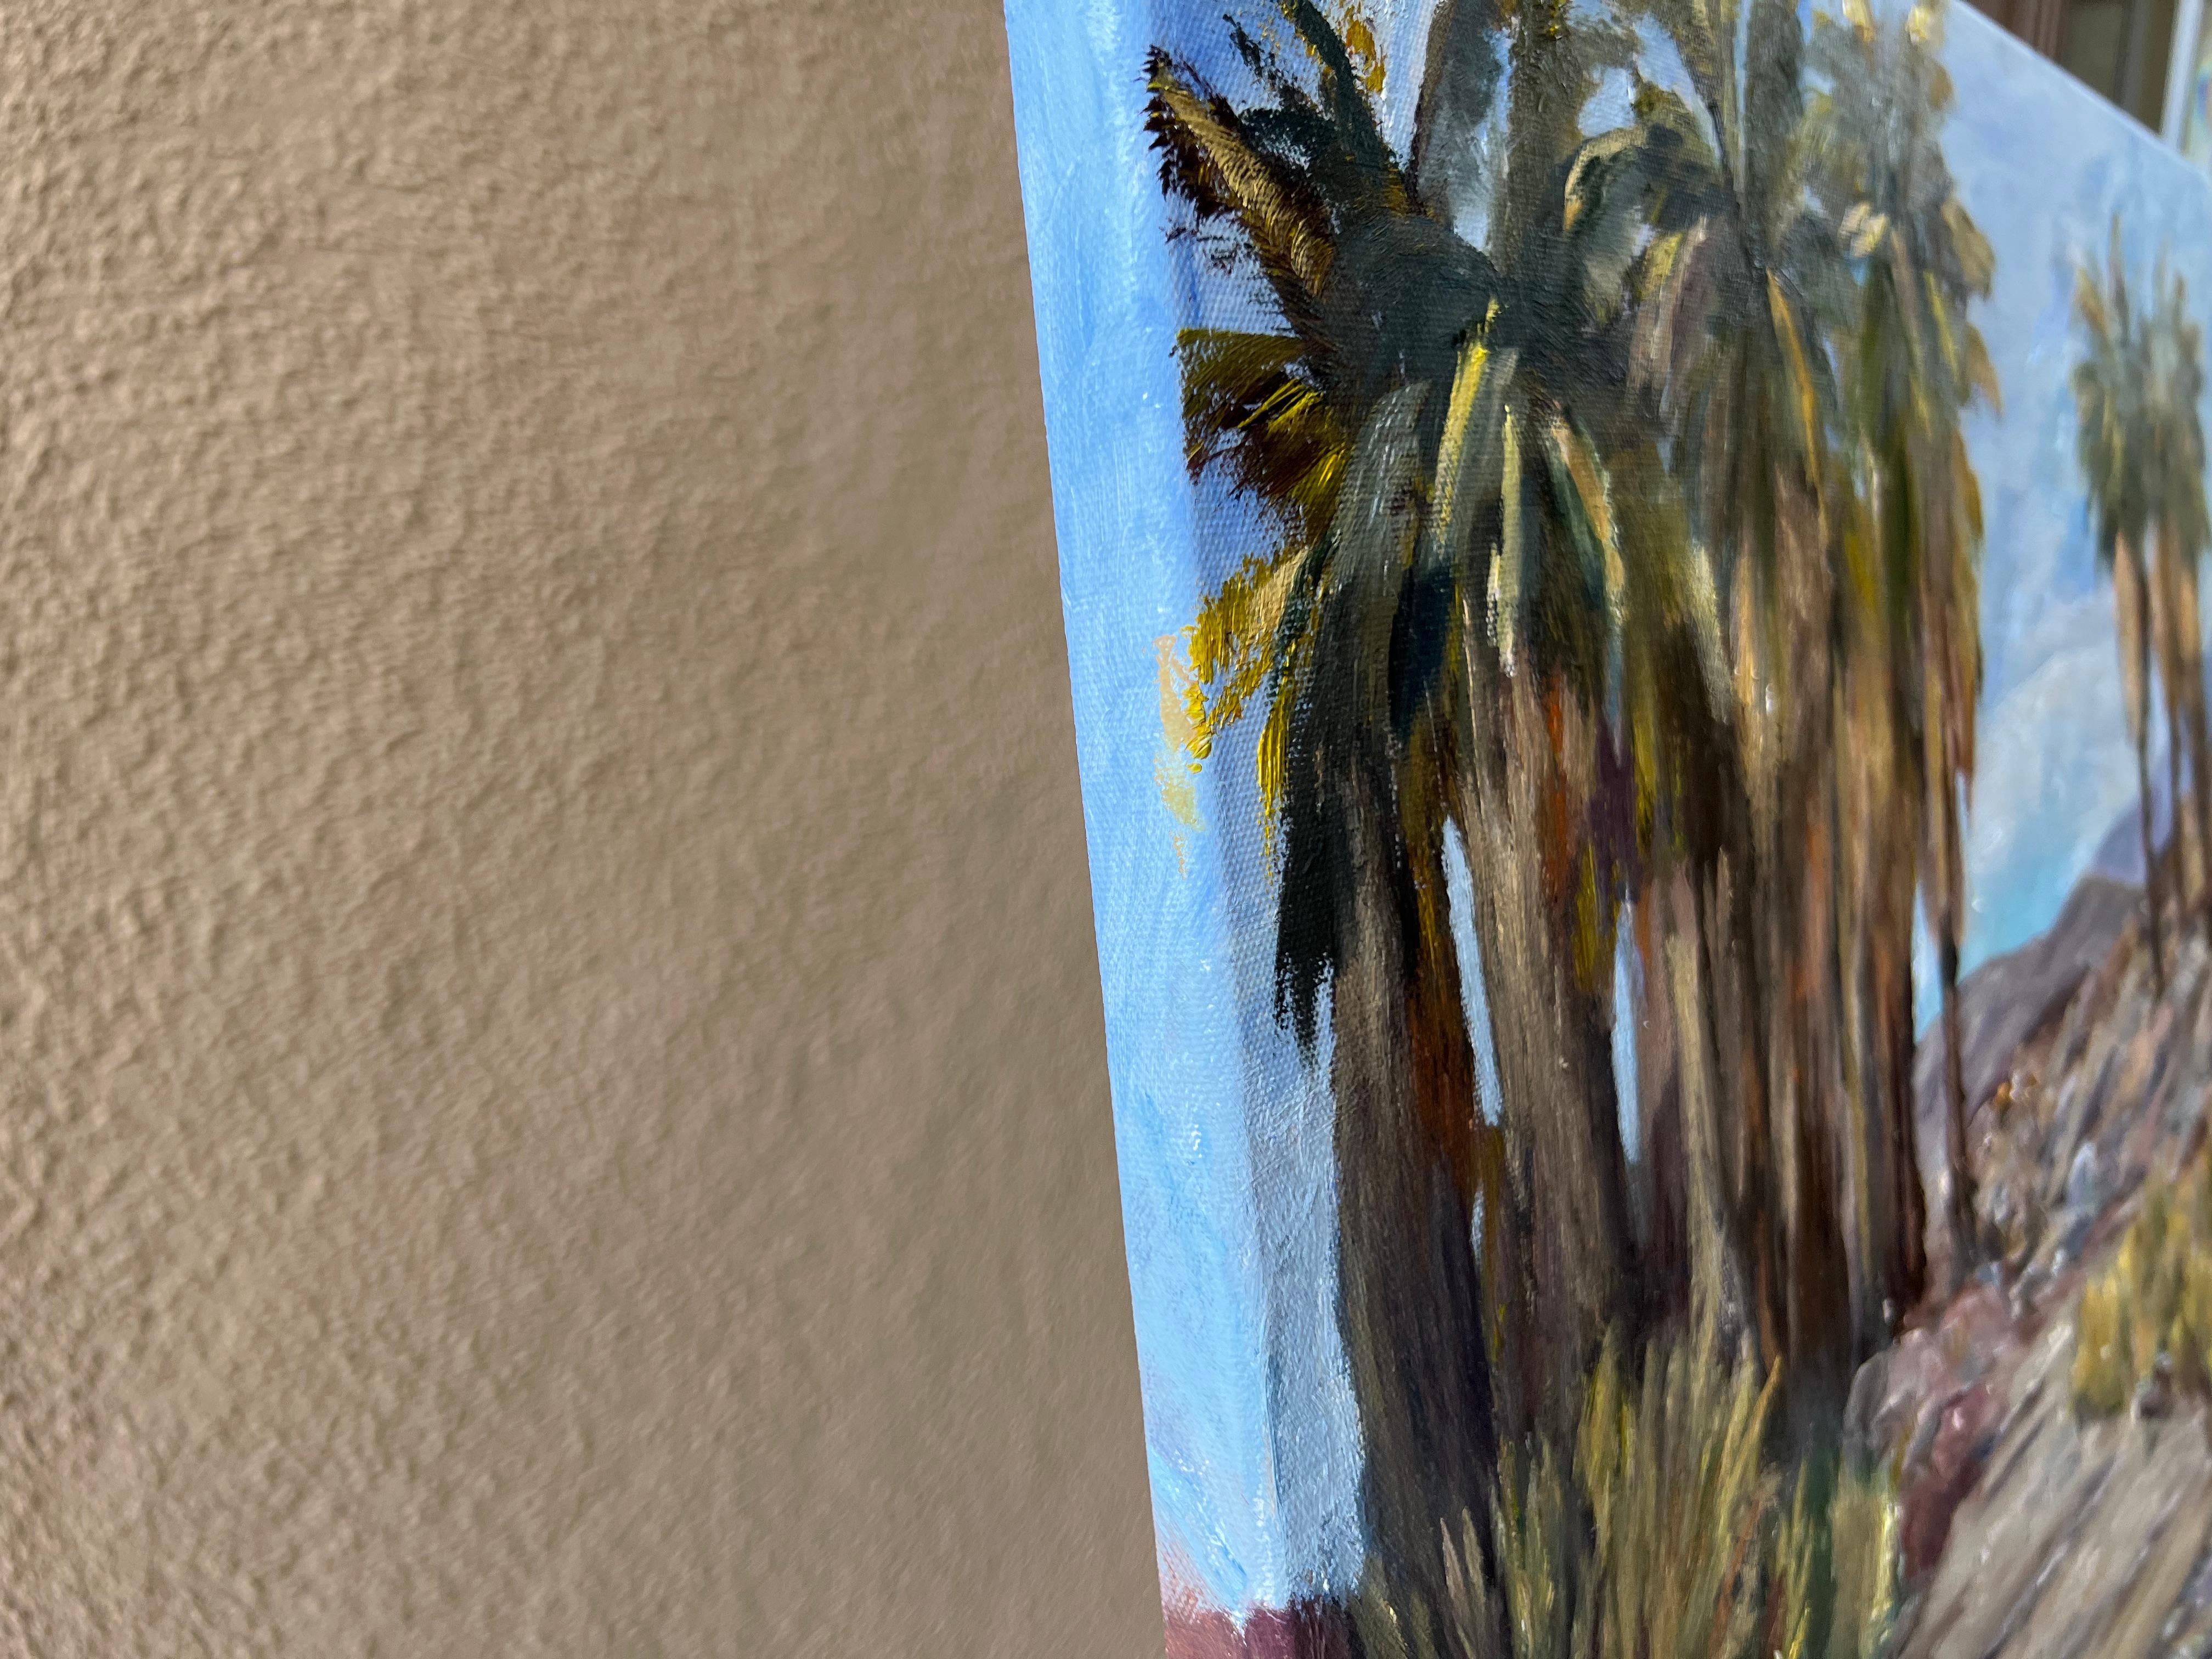 <p>Artist Comments<br>Artist Marilyn Froggatt shares a view of a desert scape with the Santa Rosa mountains in the background. Rock formations and palm trees open a hiking trail toward the sweltering valley. Marilyn paints the piece on location from